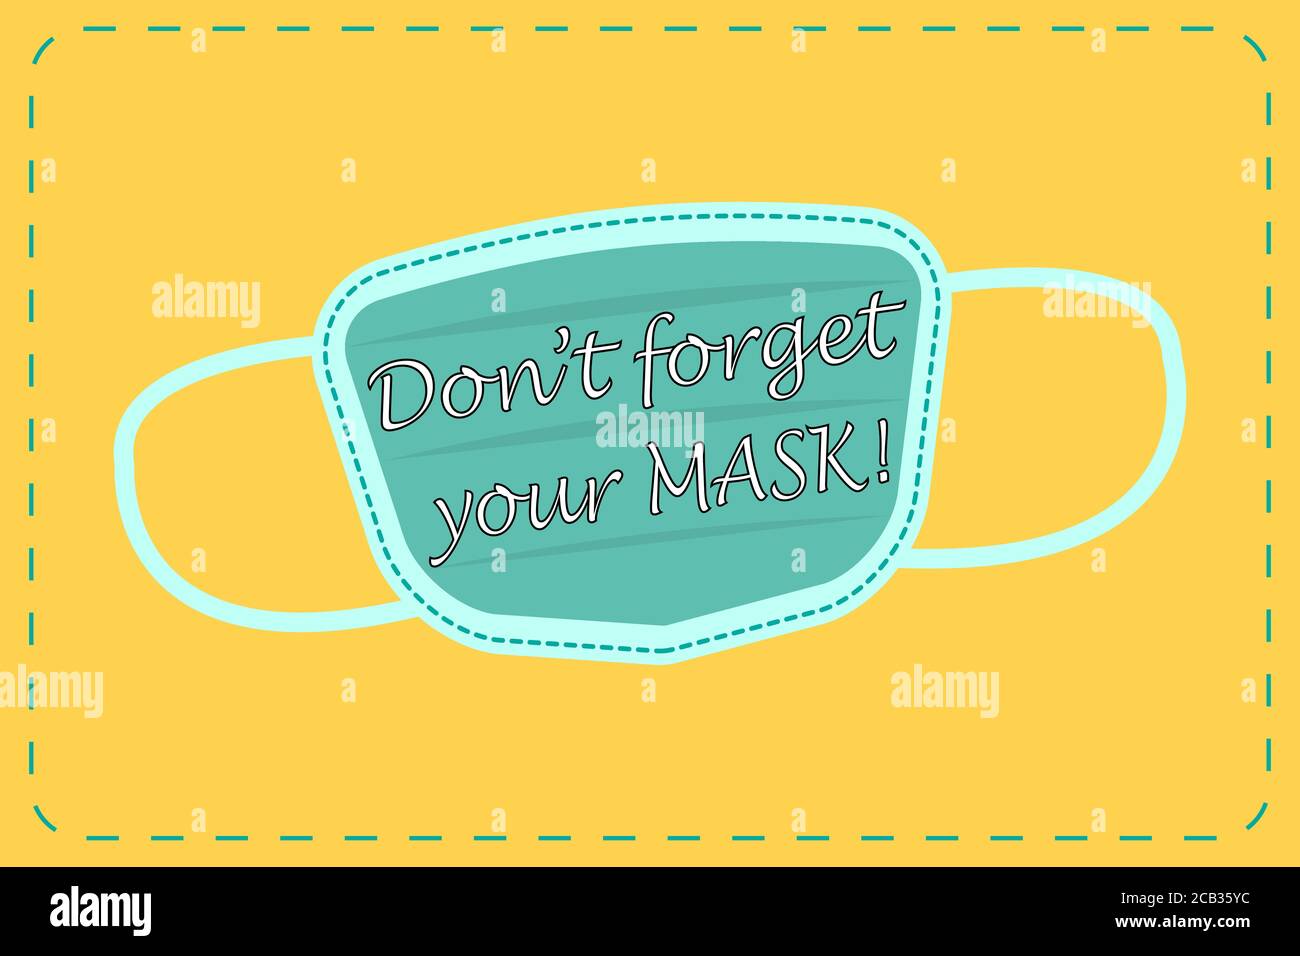 Vector illustration of a face mask with the text 'Don't forget your mask' Stock Vector